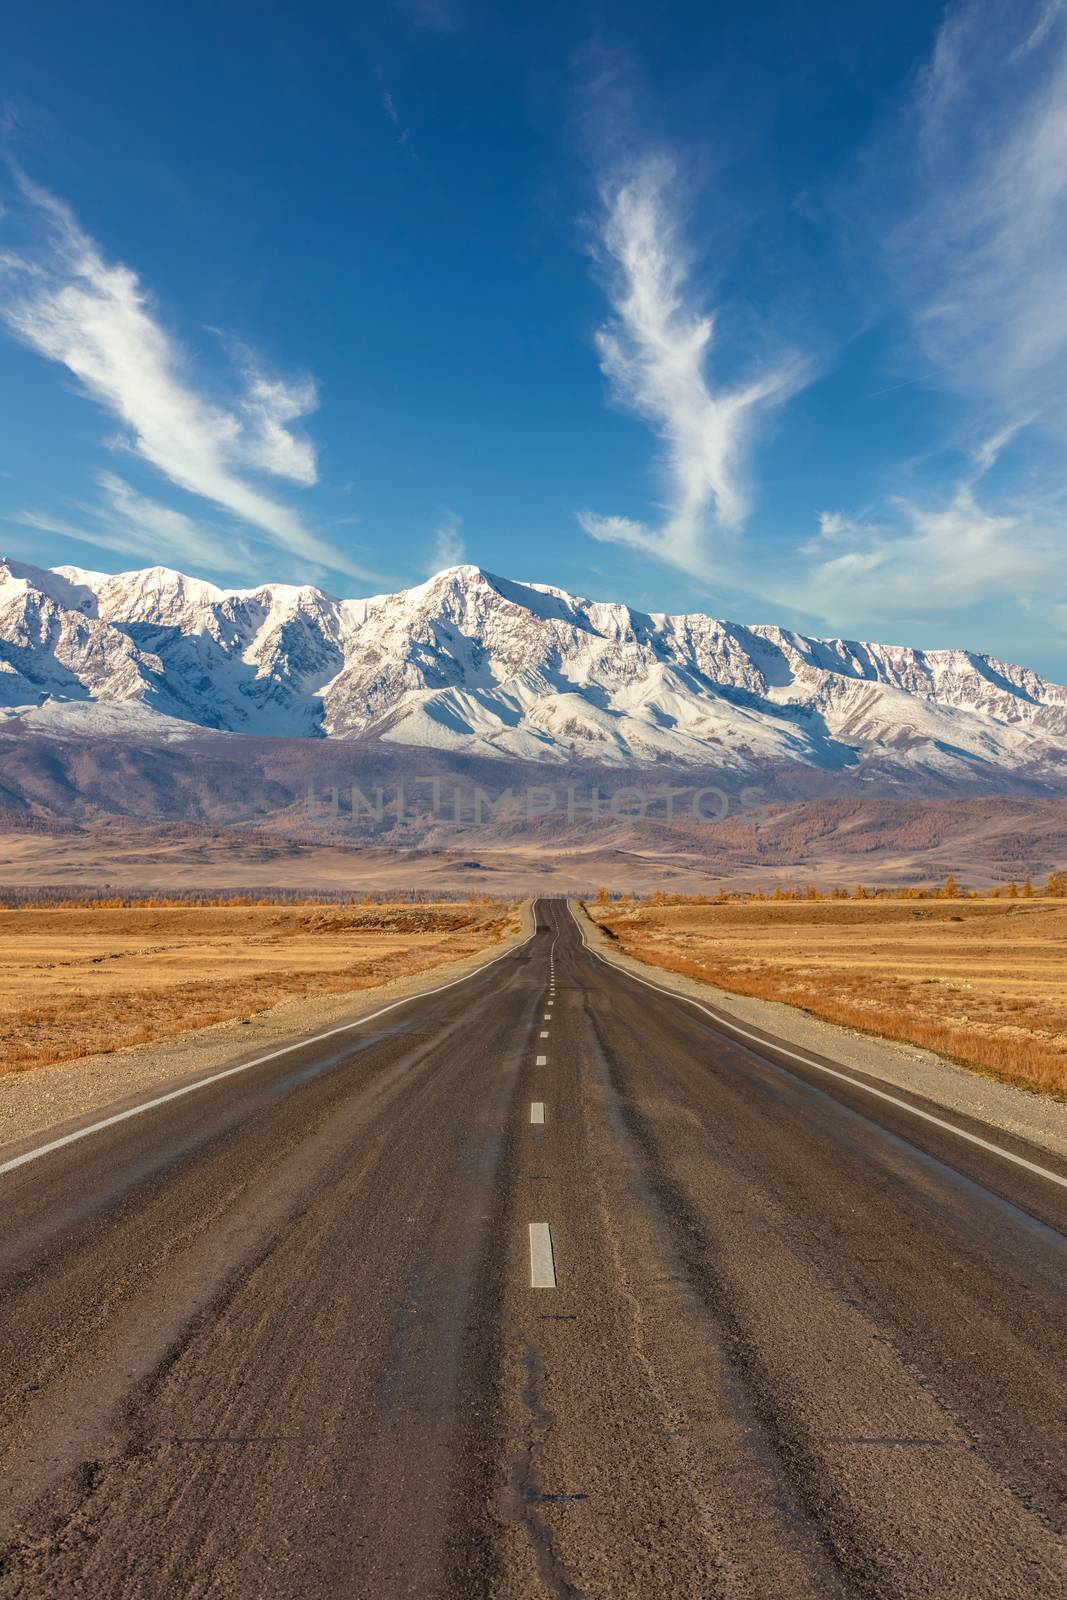 Portrait size shot of a straight empty highway leading to the snowy peaks of The Kuray mountain range. Beautiful blue cloudy sky as a background. Altai mountains, Siberia, Russia by DamantisZ